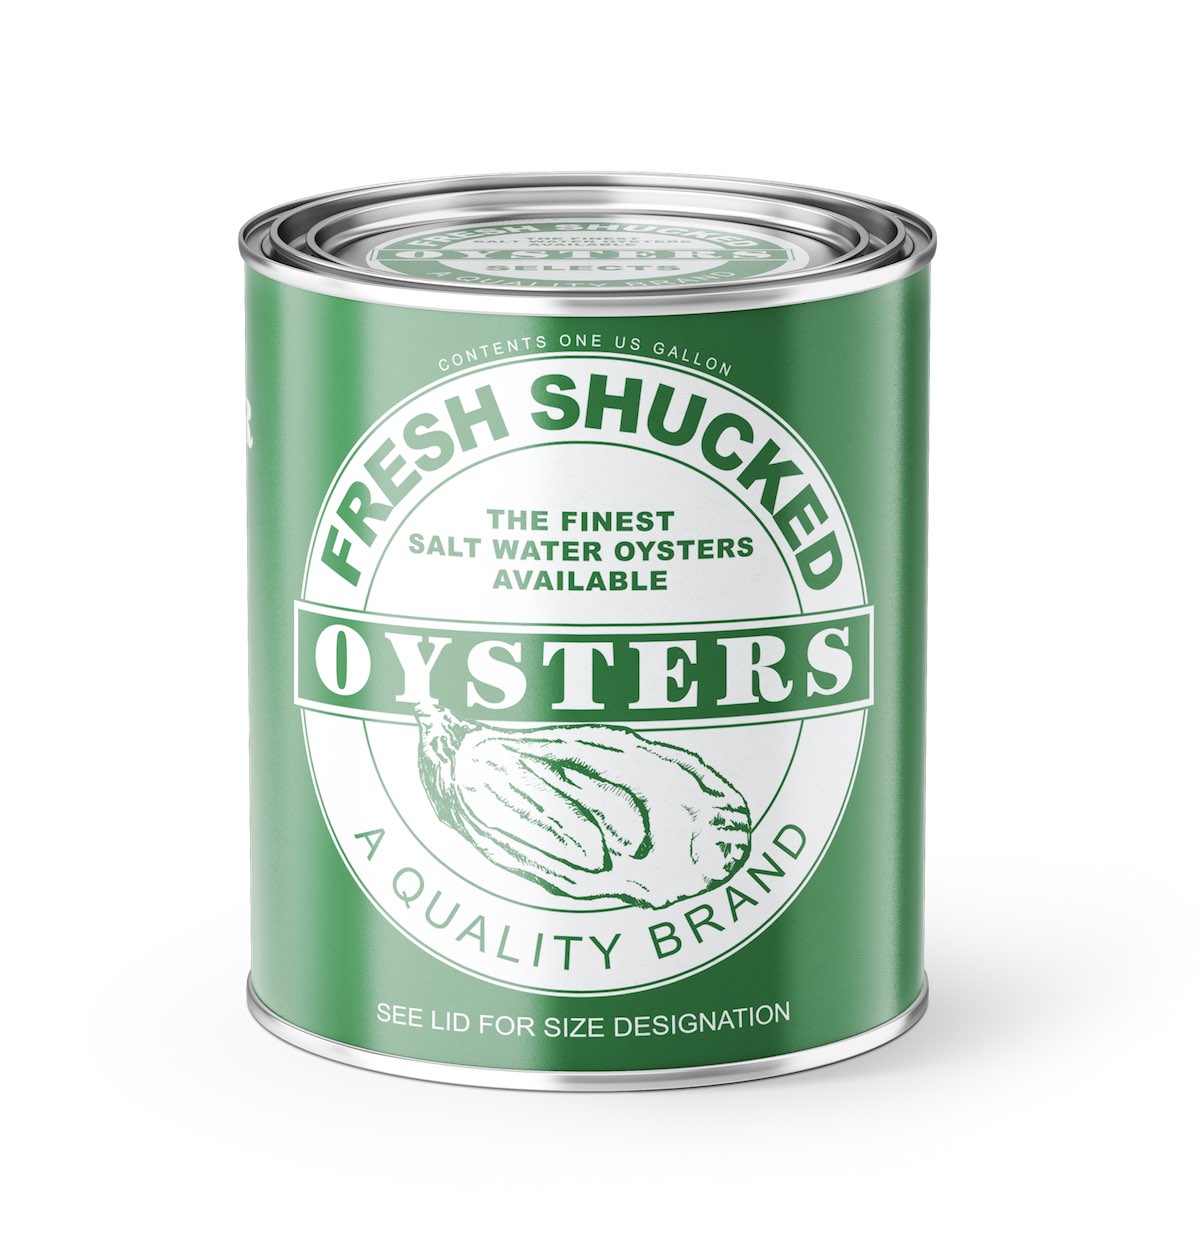 Fresh Shucked Oysters Vintage Style Candle